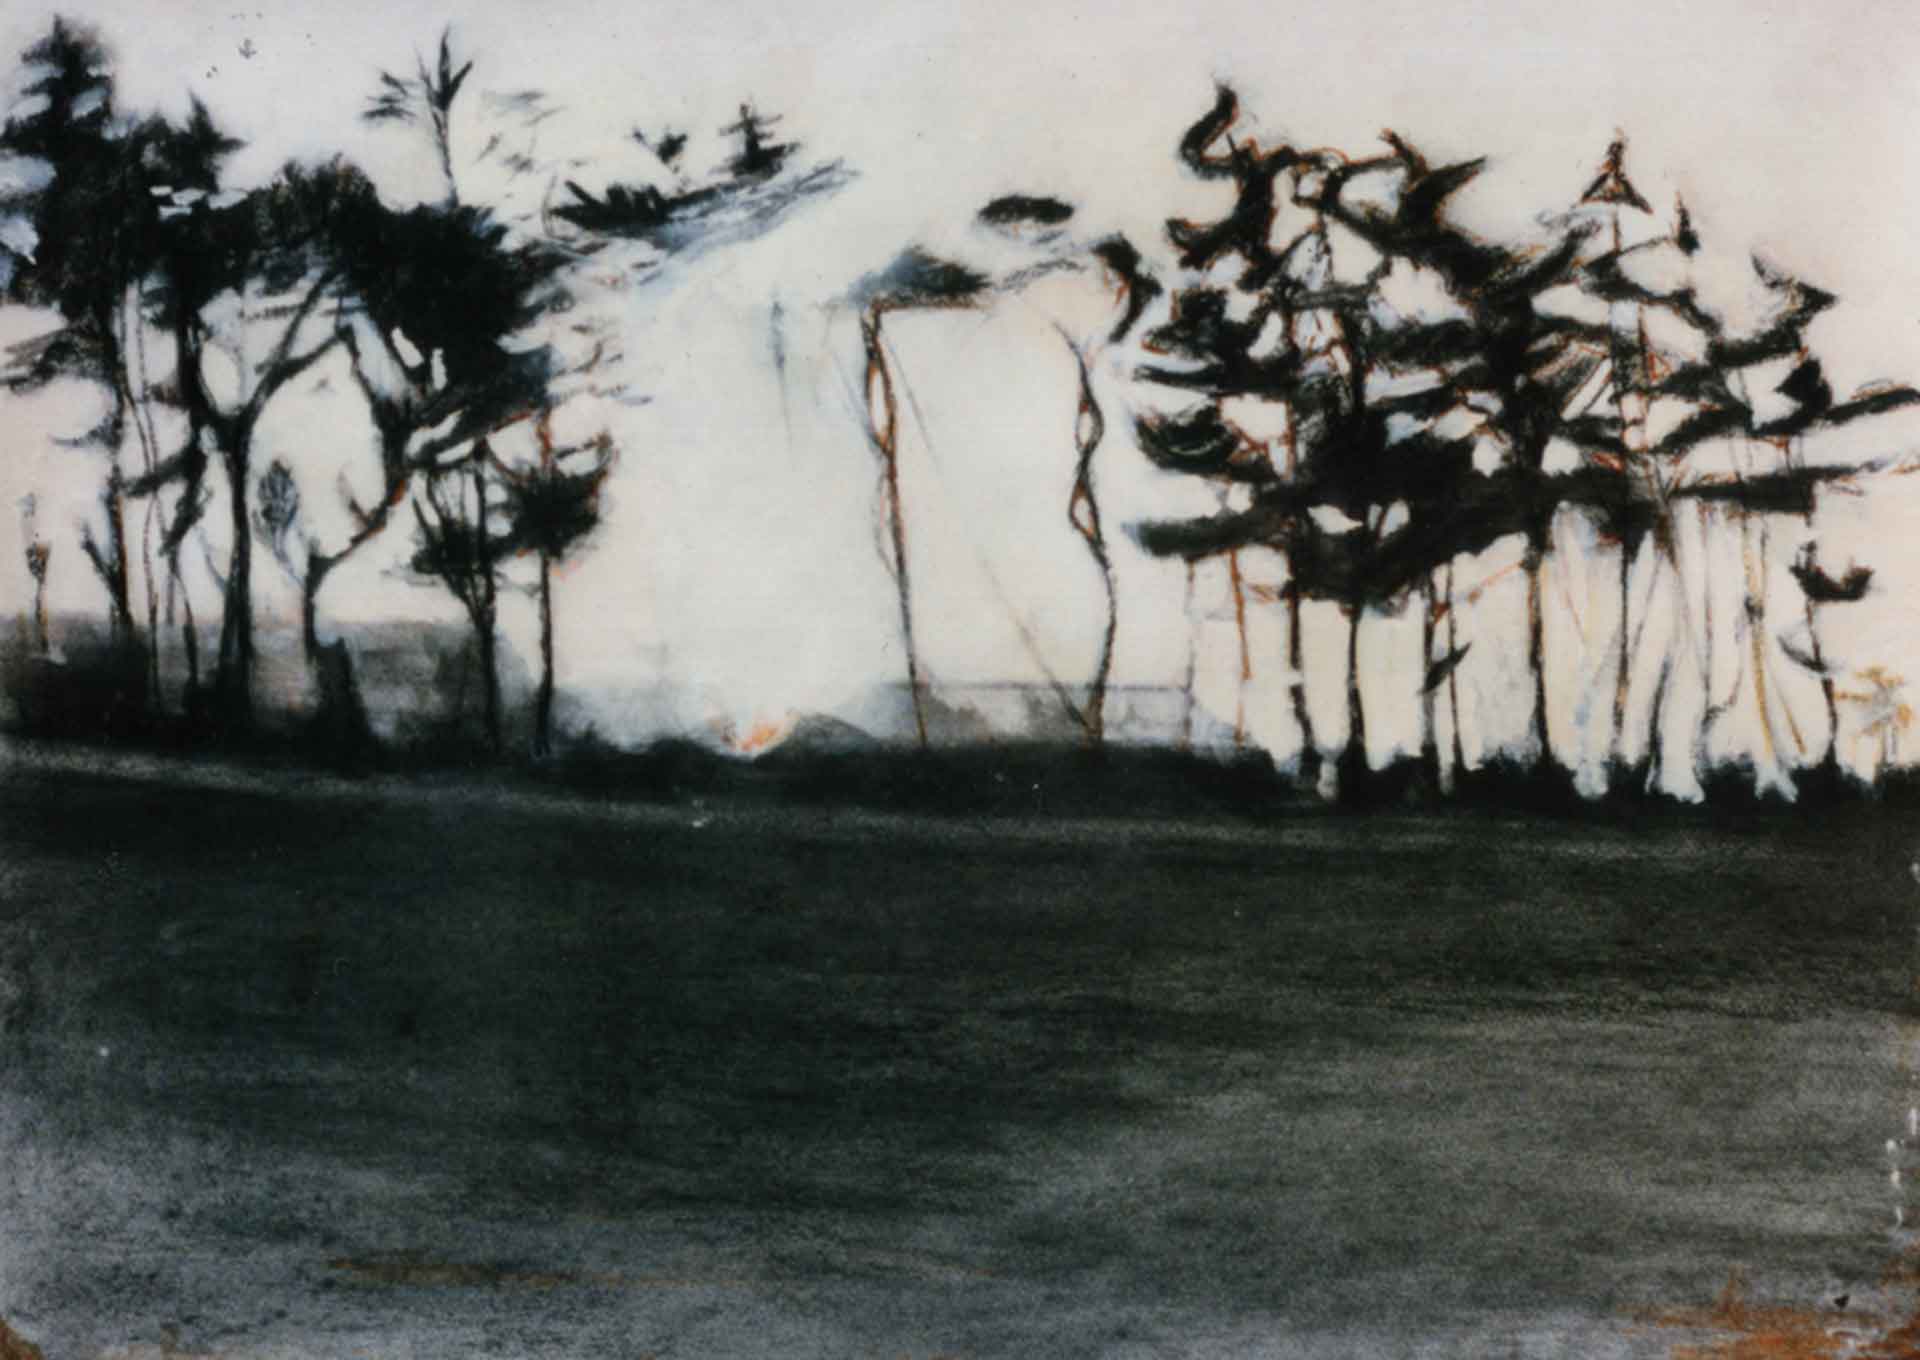 Bewliehill, Scotland. Charcoal And Acrylic Drawing By Victoria Orr Ewing